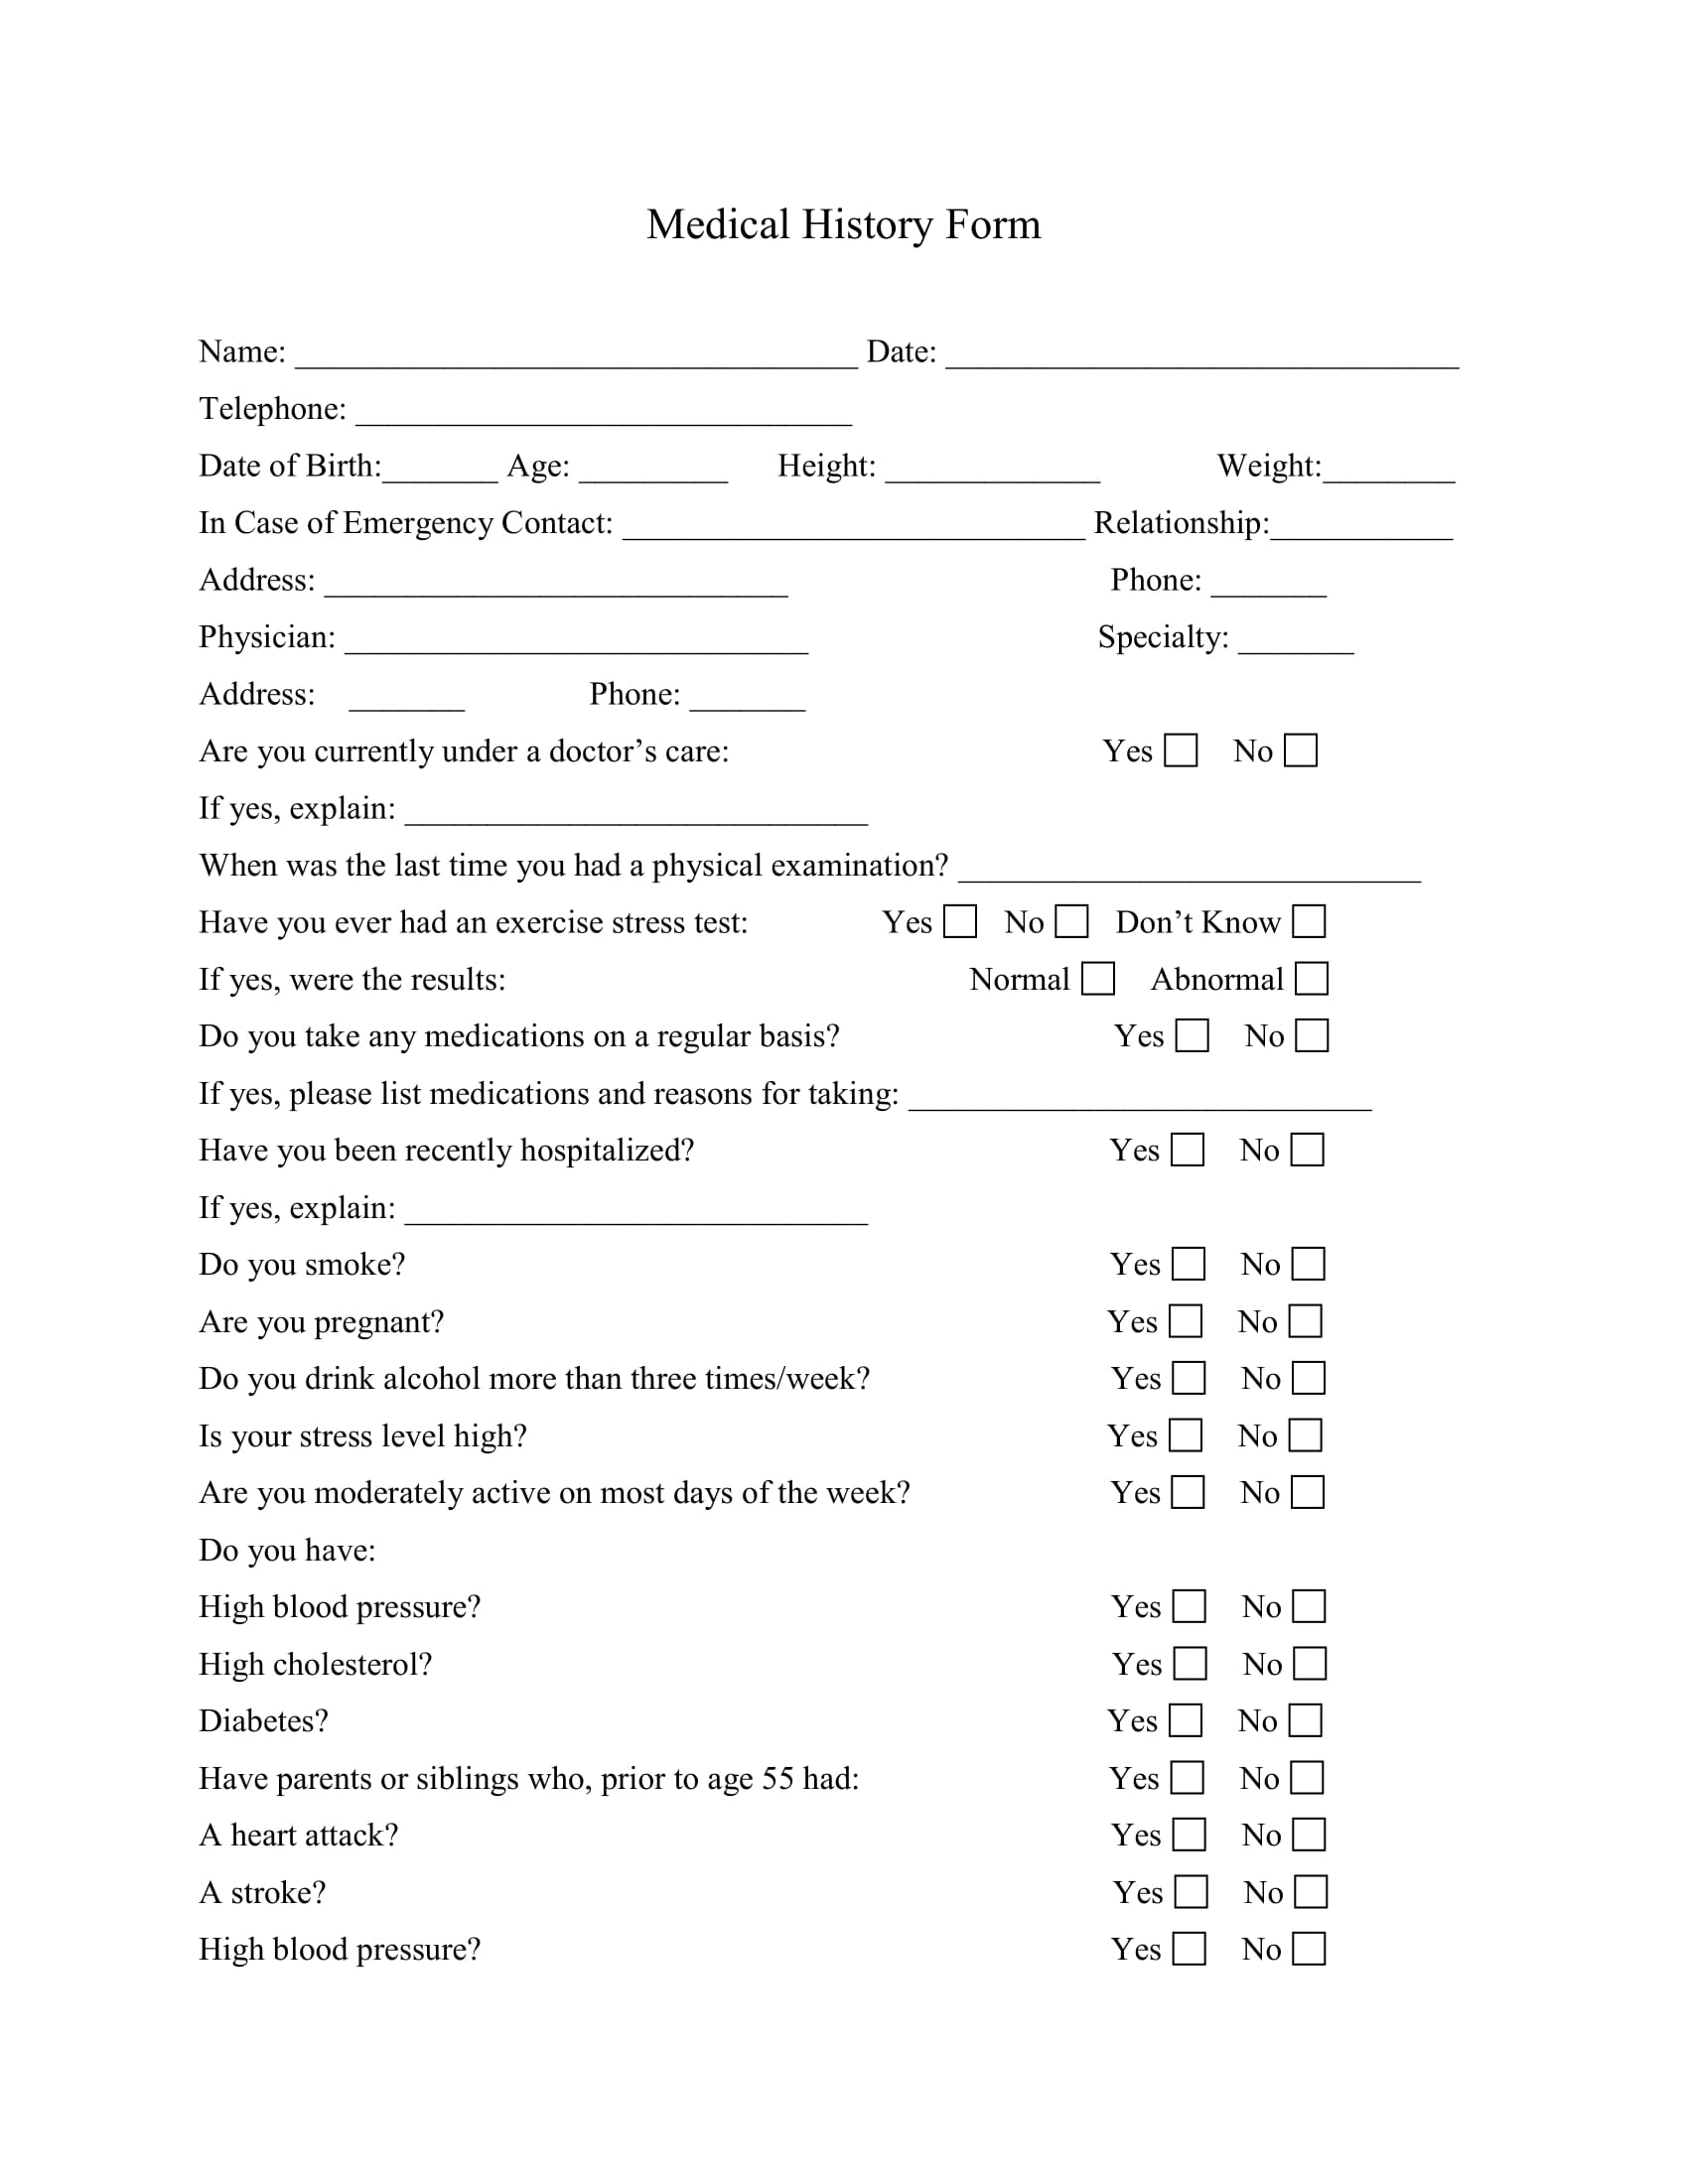 Medical history form for personal trainers you can print in pdf or word format.